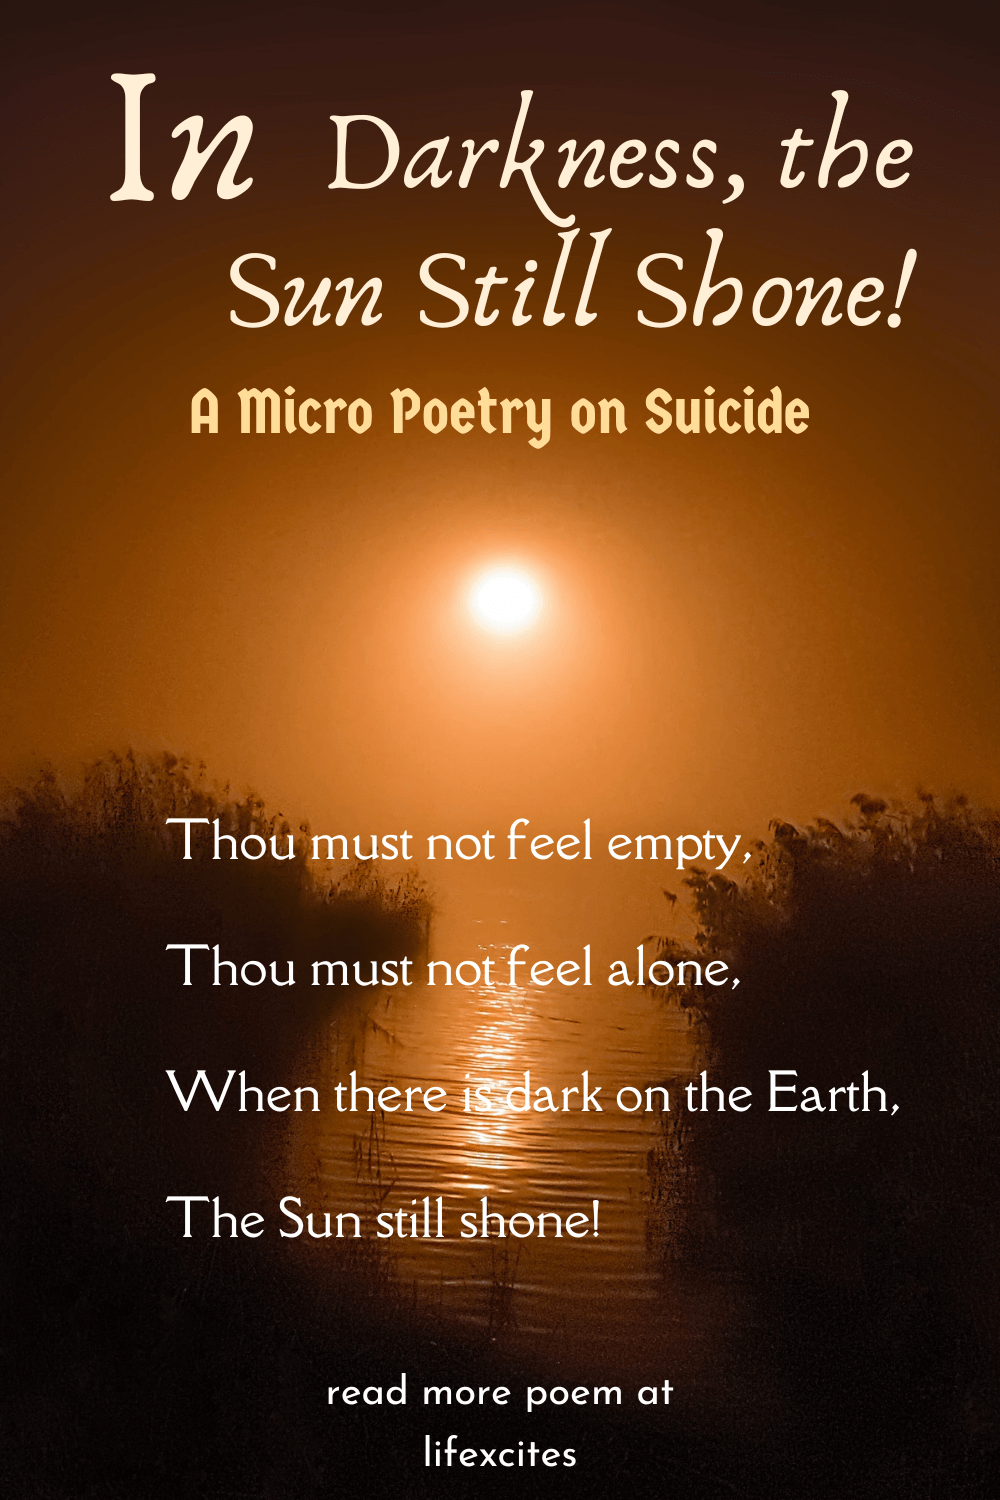 In Darkness, the Sun Still Shone! – A Micro Poetry on Suicide